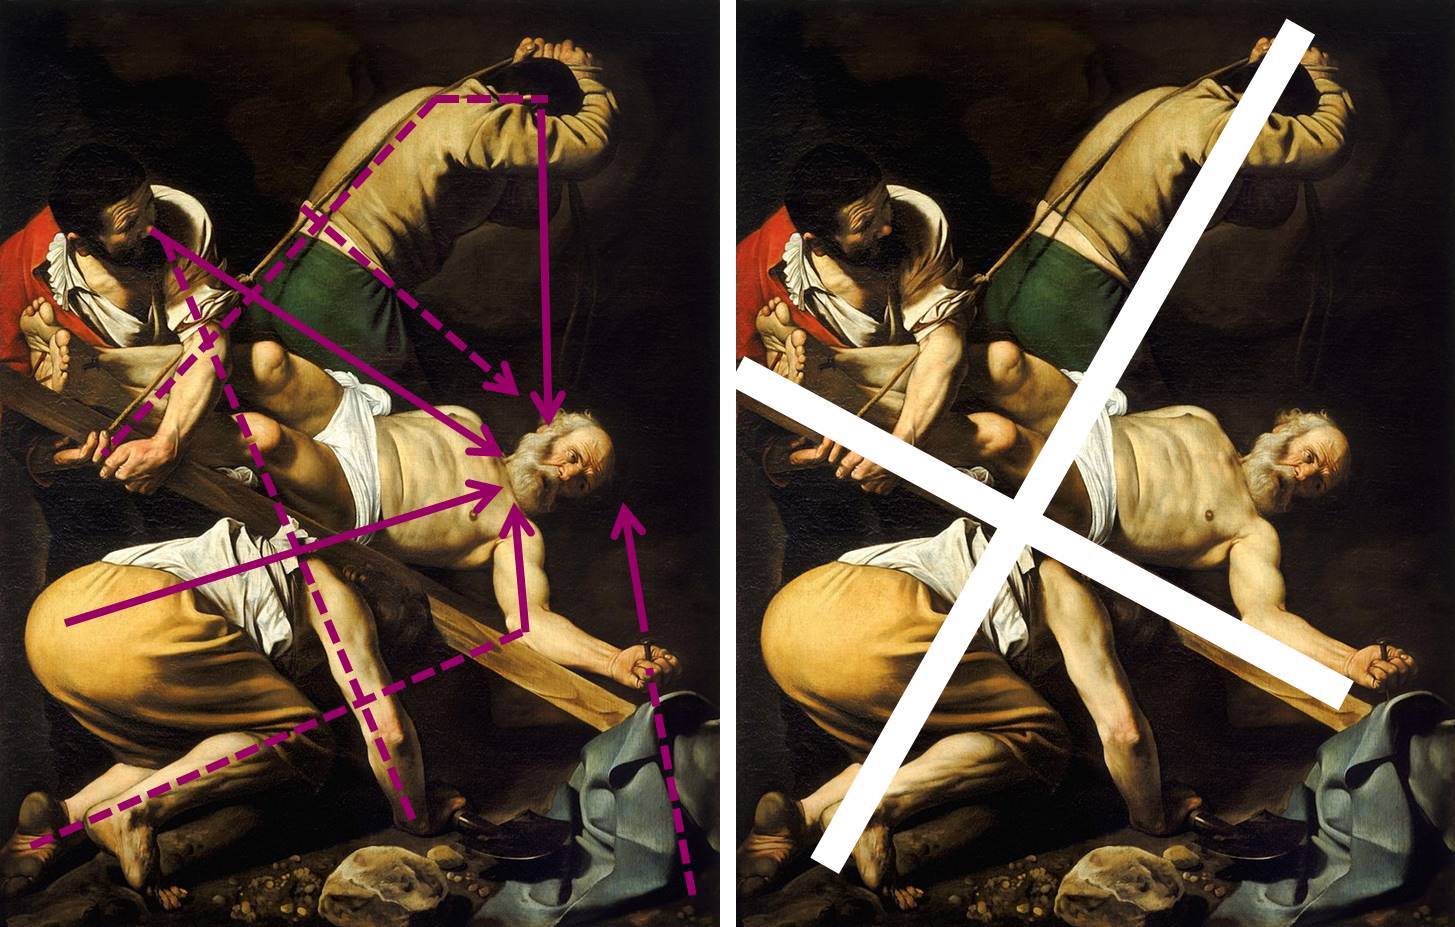 Painting with arrows that indicate viewing direction